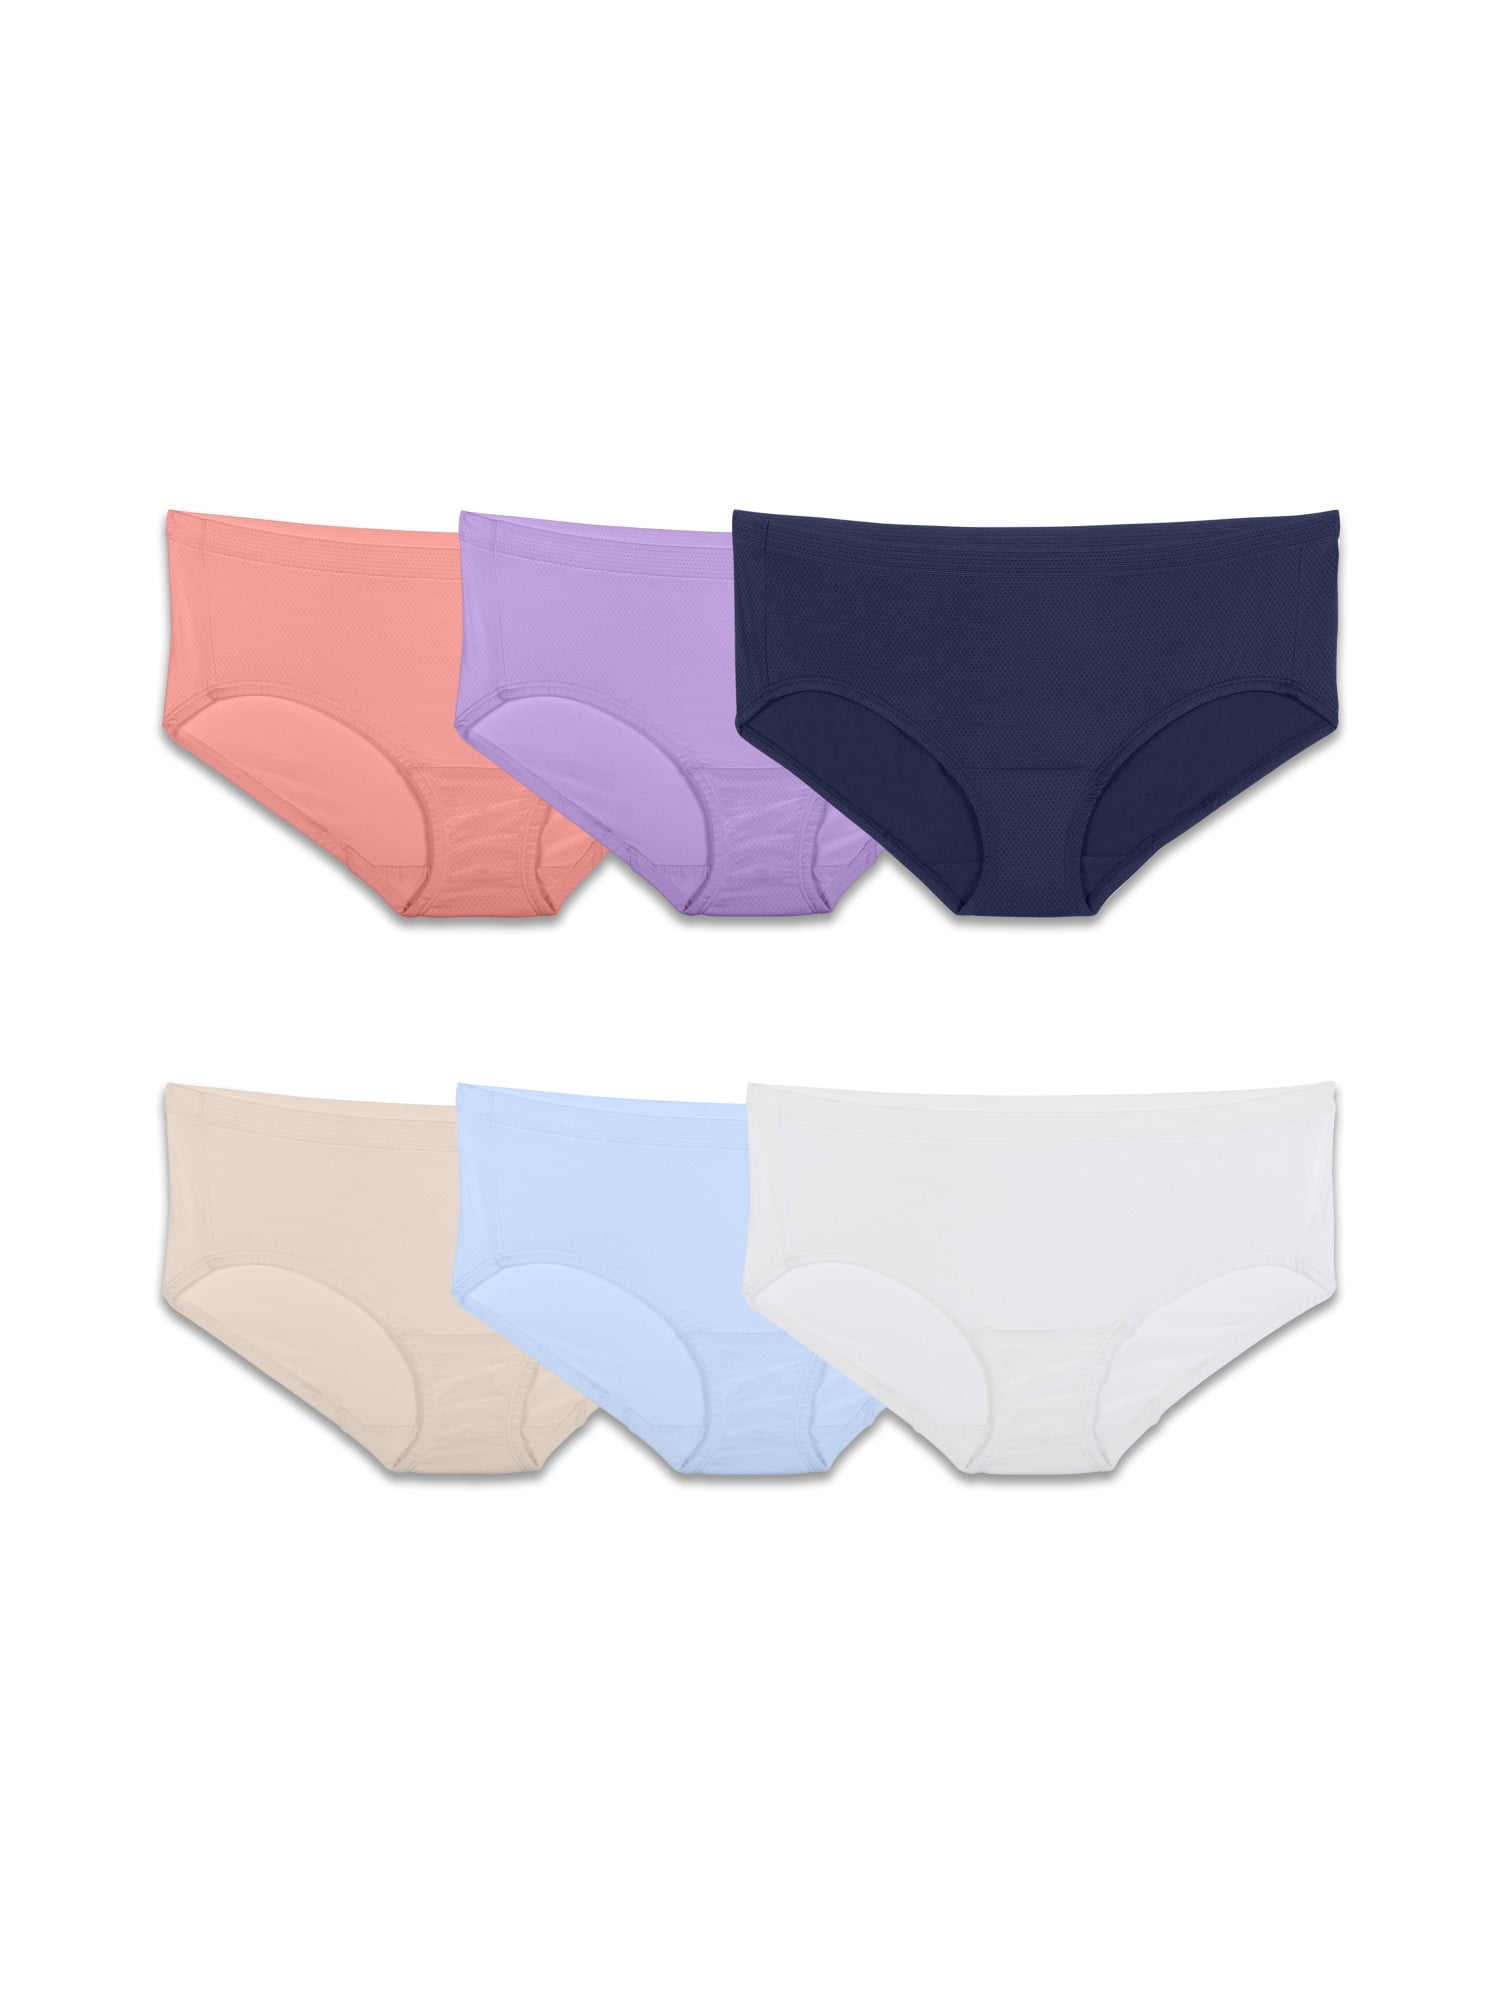 Fit for Me by Fruit of the Loom Women's Cotton Briefs, 5 Pack Plus Size  Panties